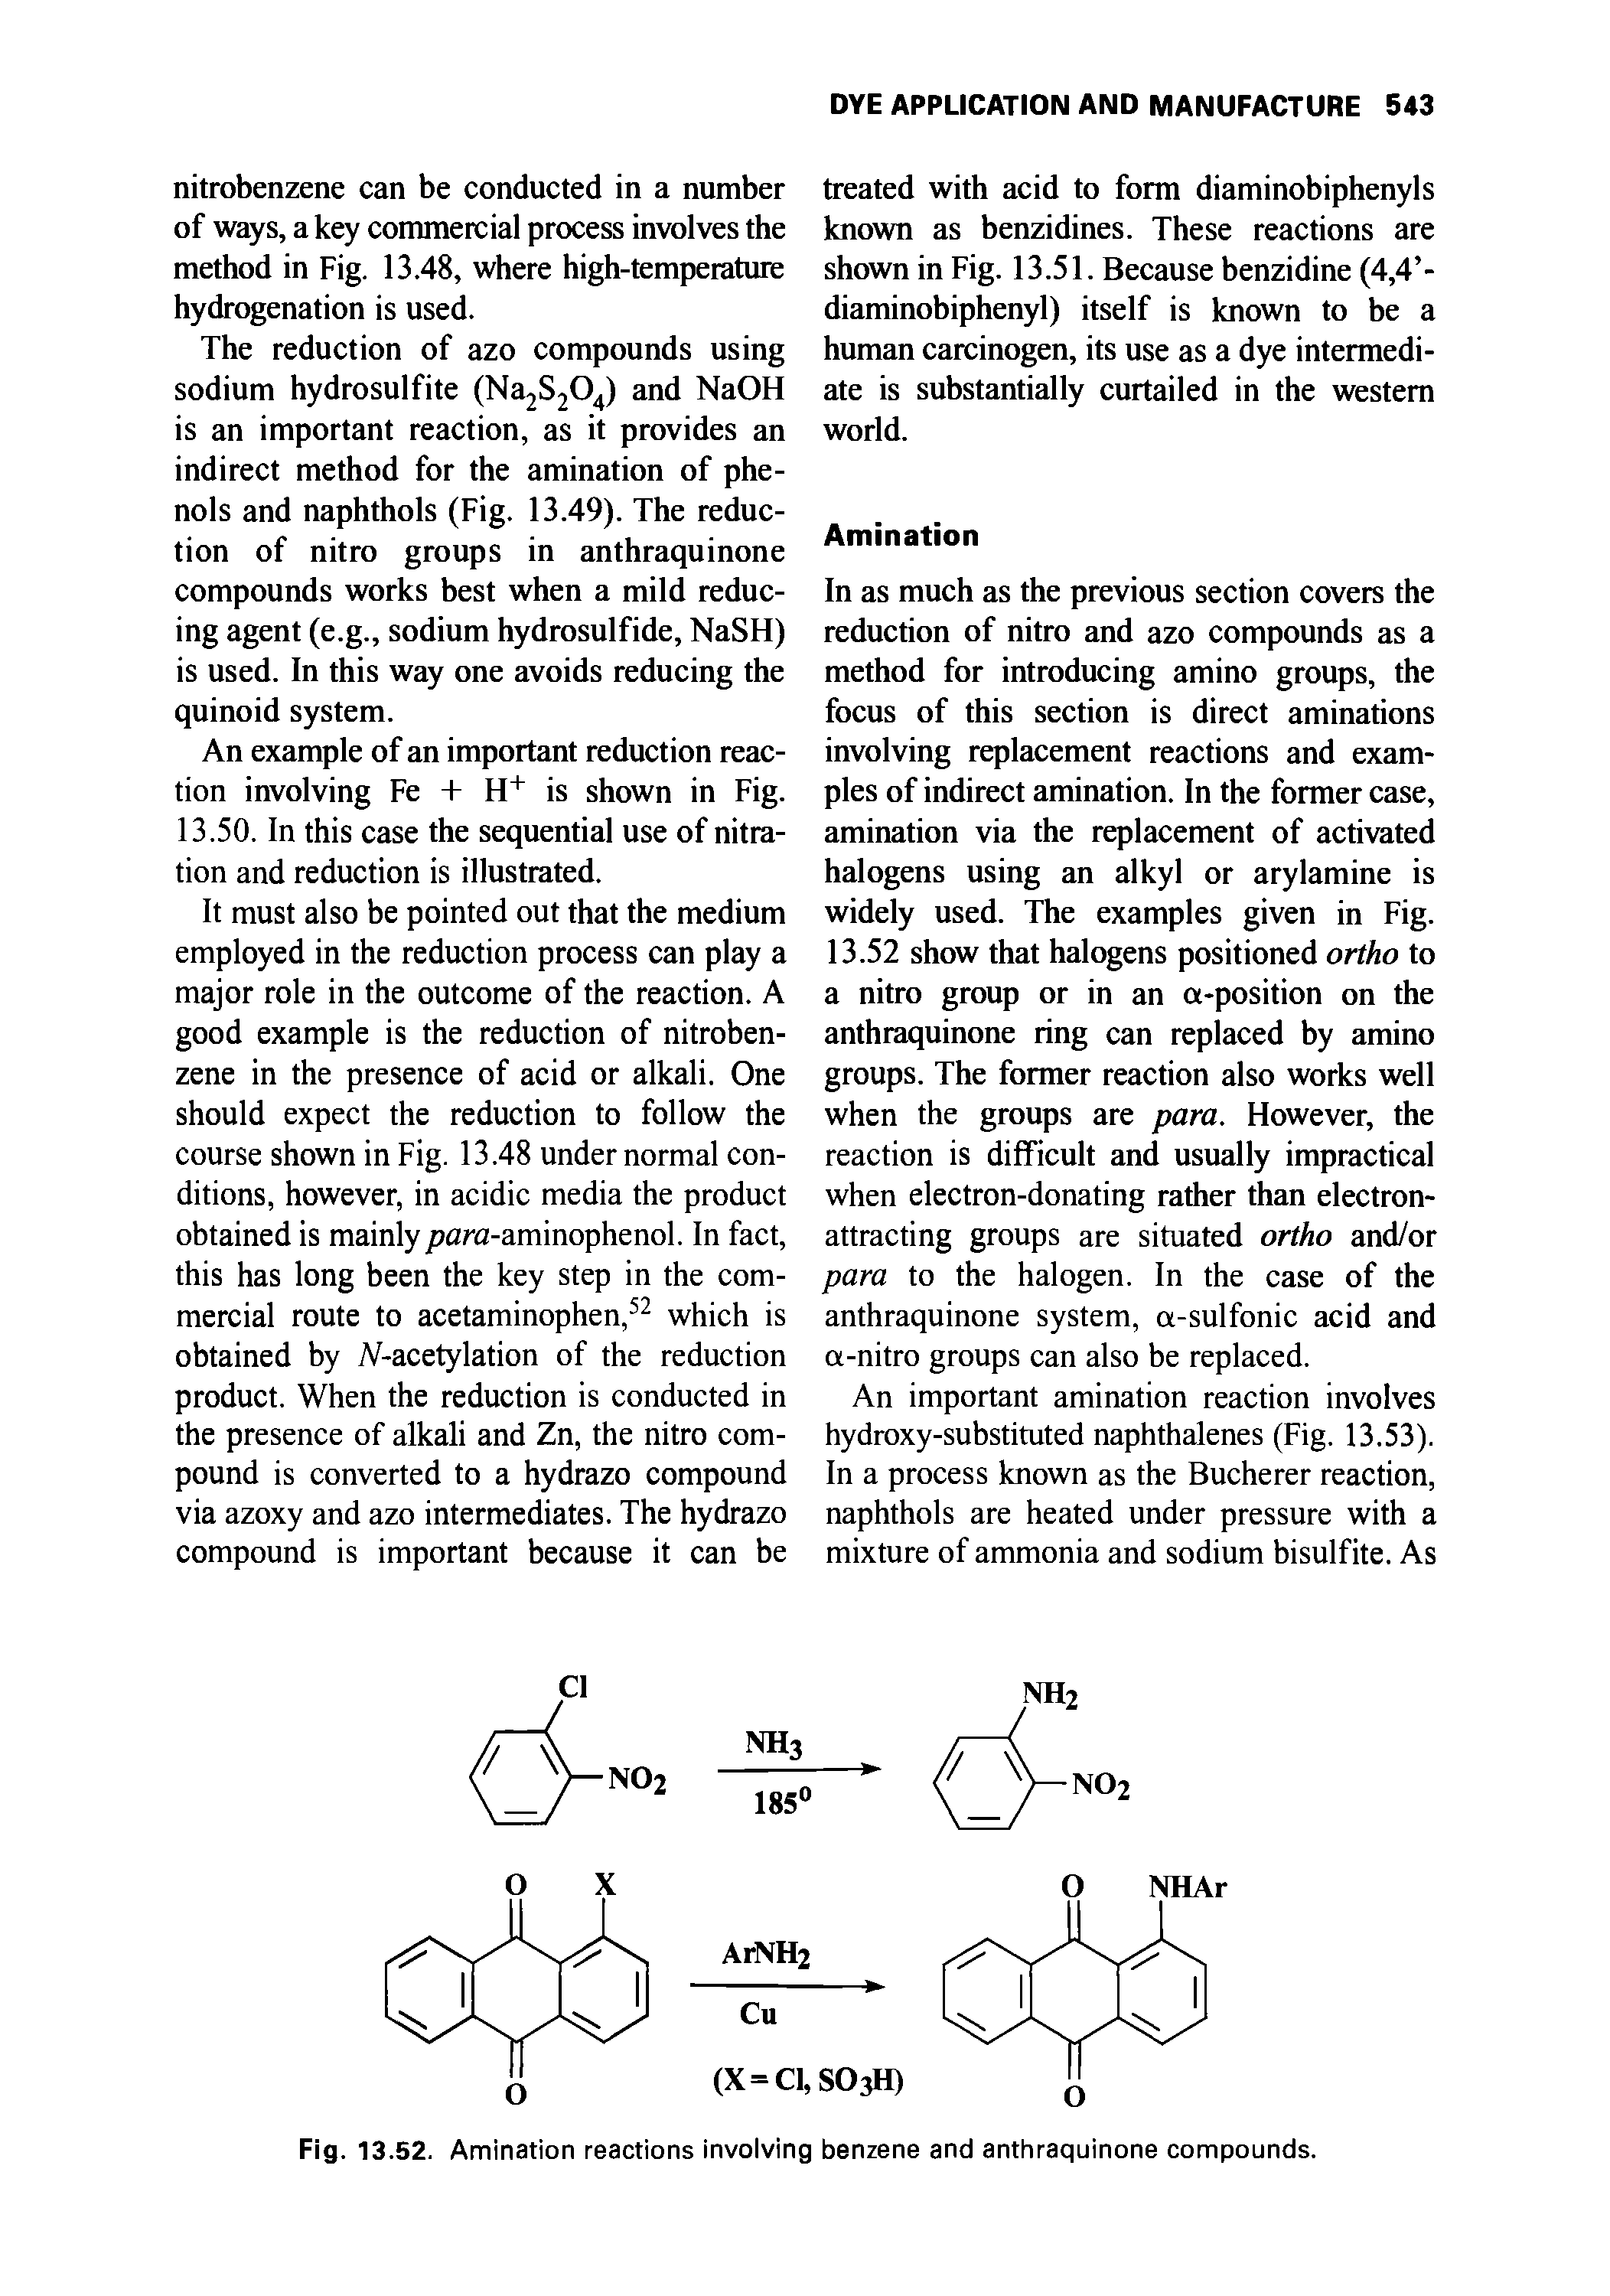 Fig. 13.52. Amination reactions involving benzene and anthraquinone compounds.